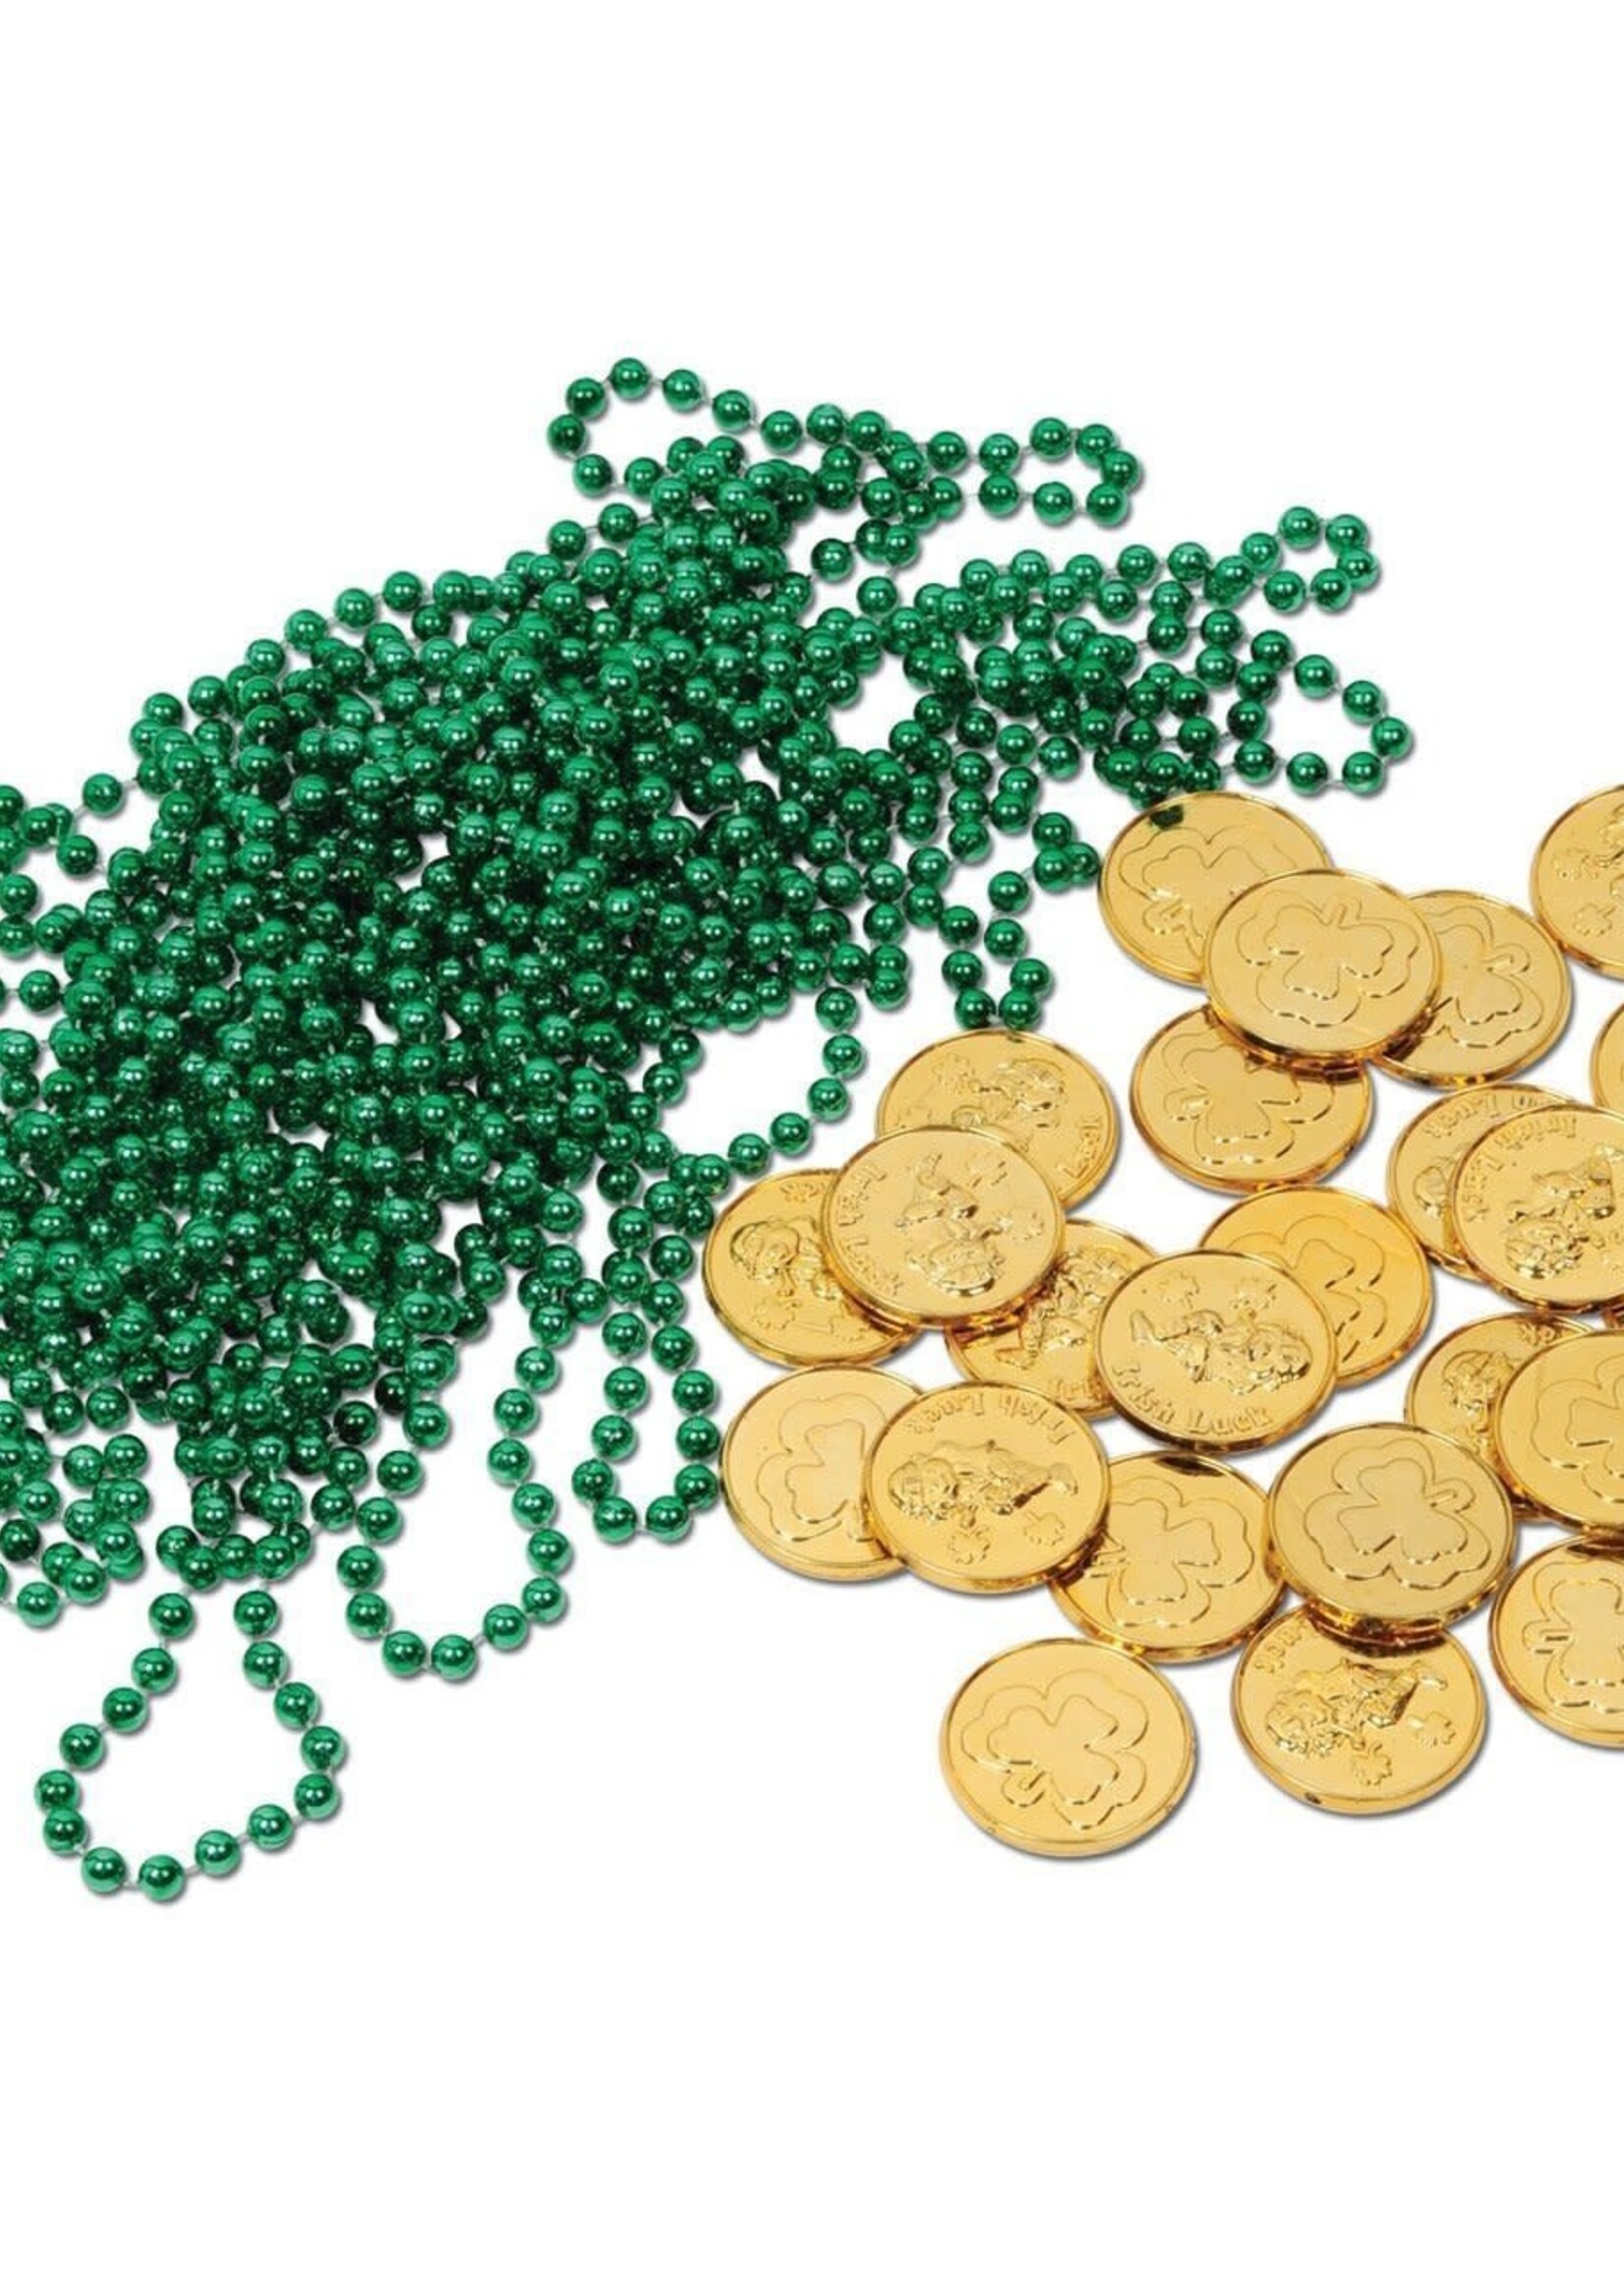 Leprechaun Loot BEADS AND COINS